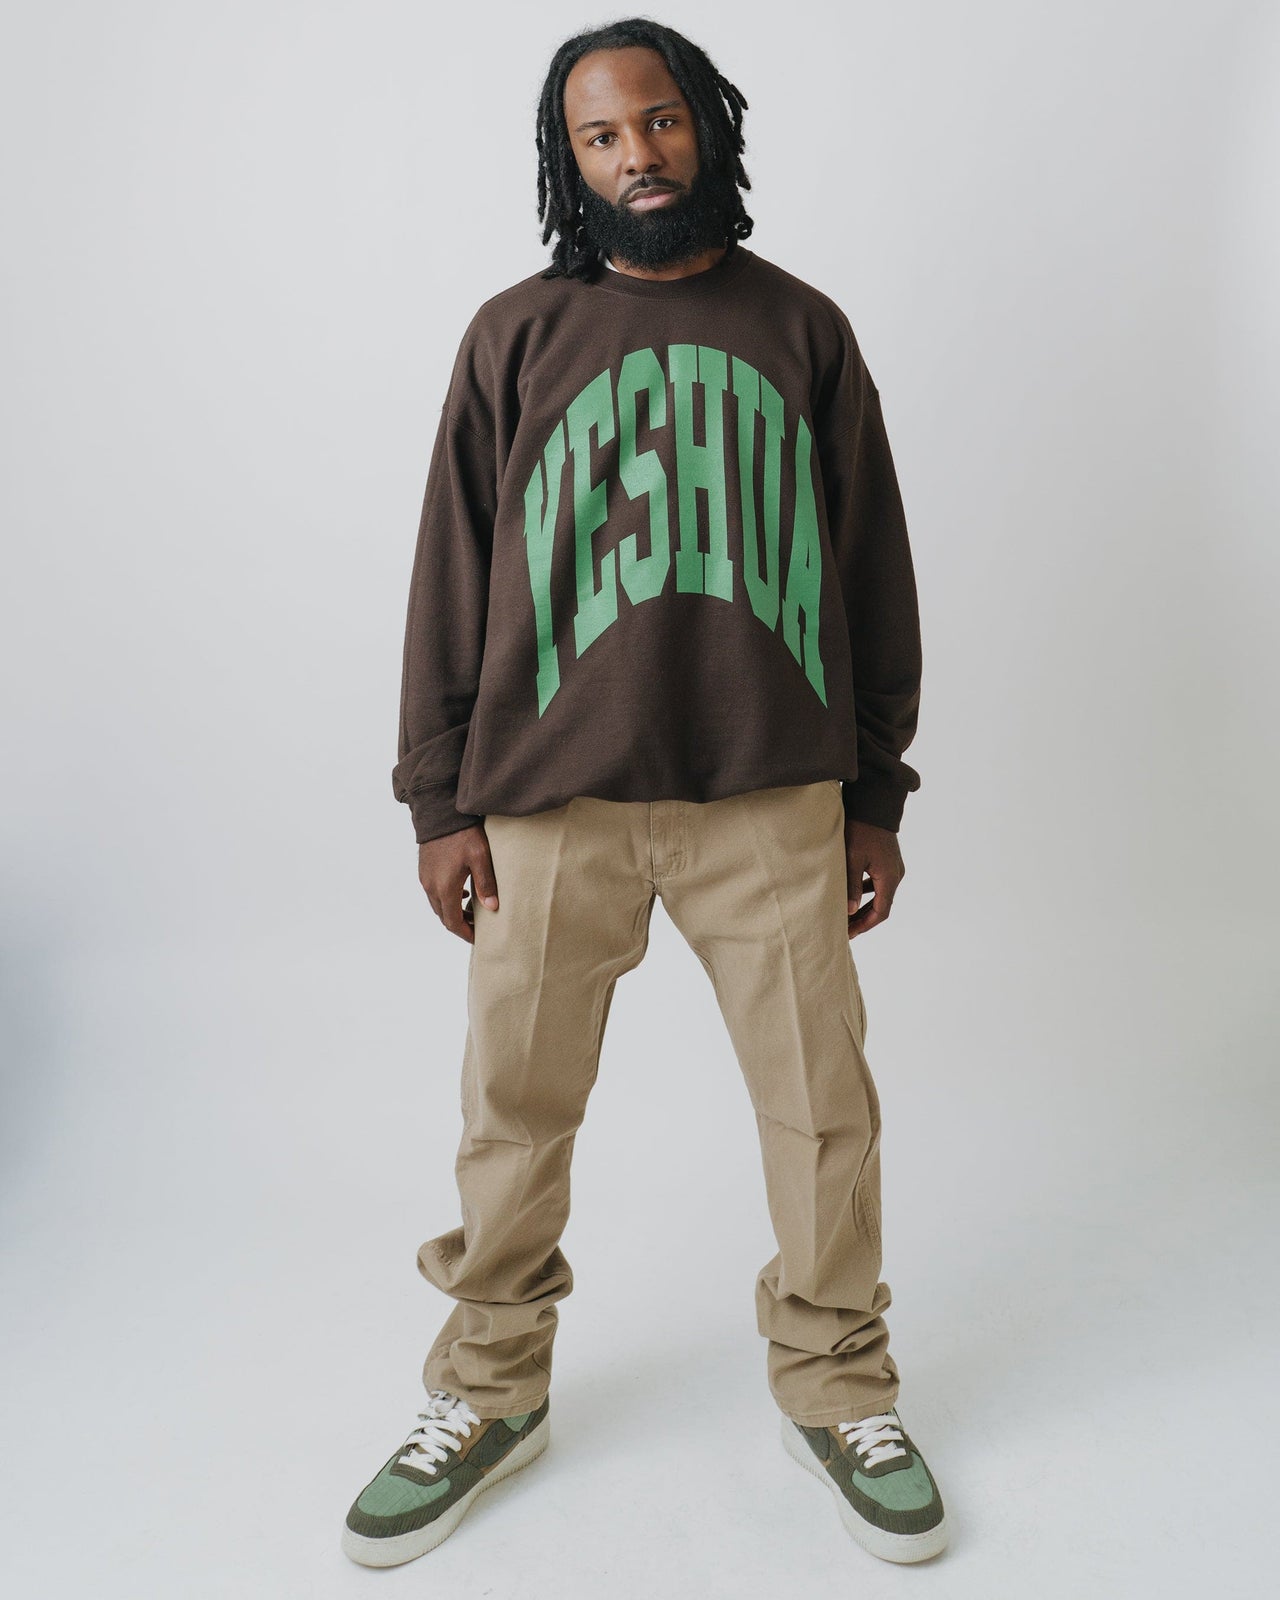 The Yeshua Spirit crewneck sweatshirt in brown by NHIM Apparel Christian clothing brand. He came to heal us, deliver us, and make us whole.